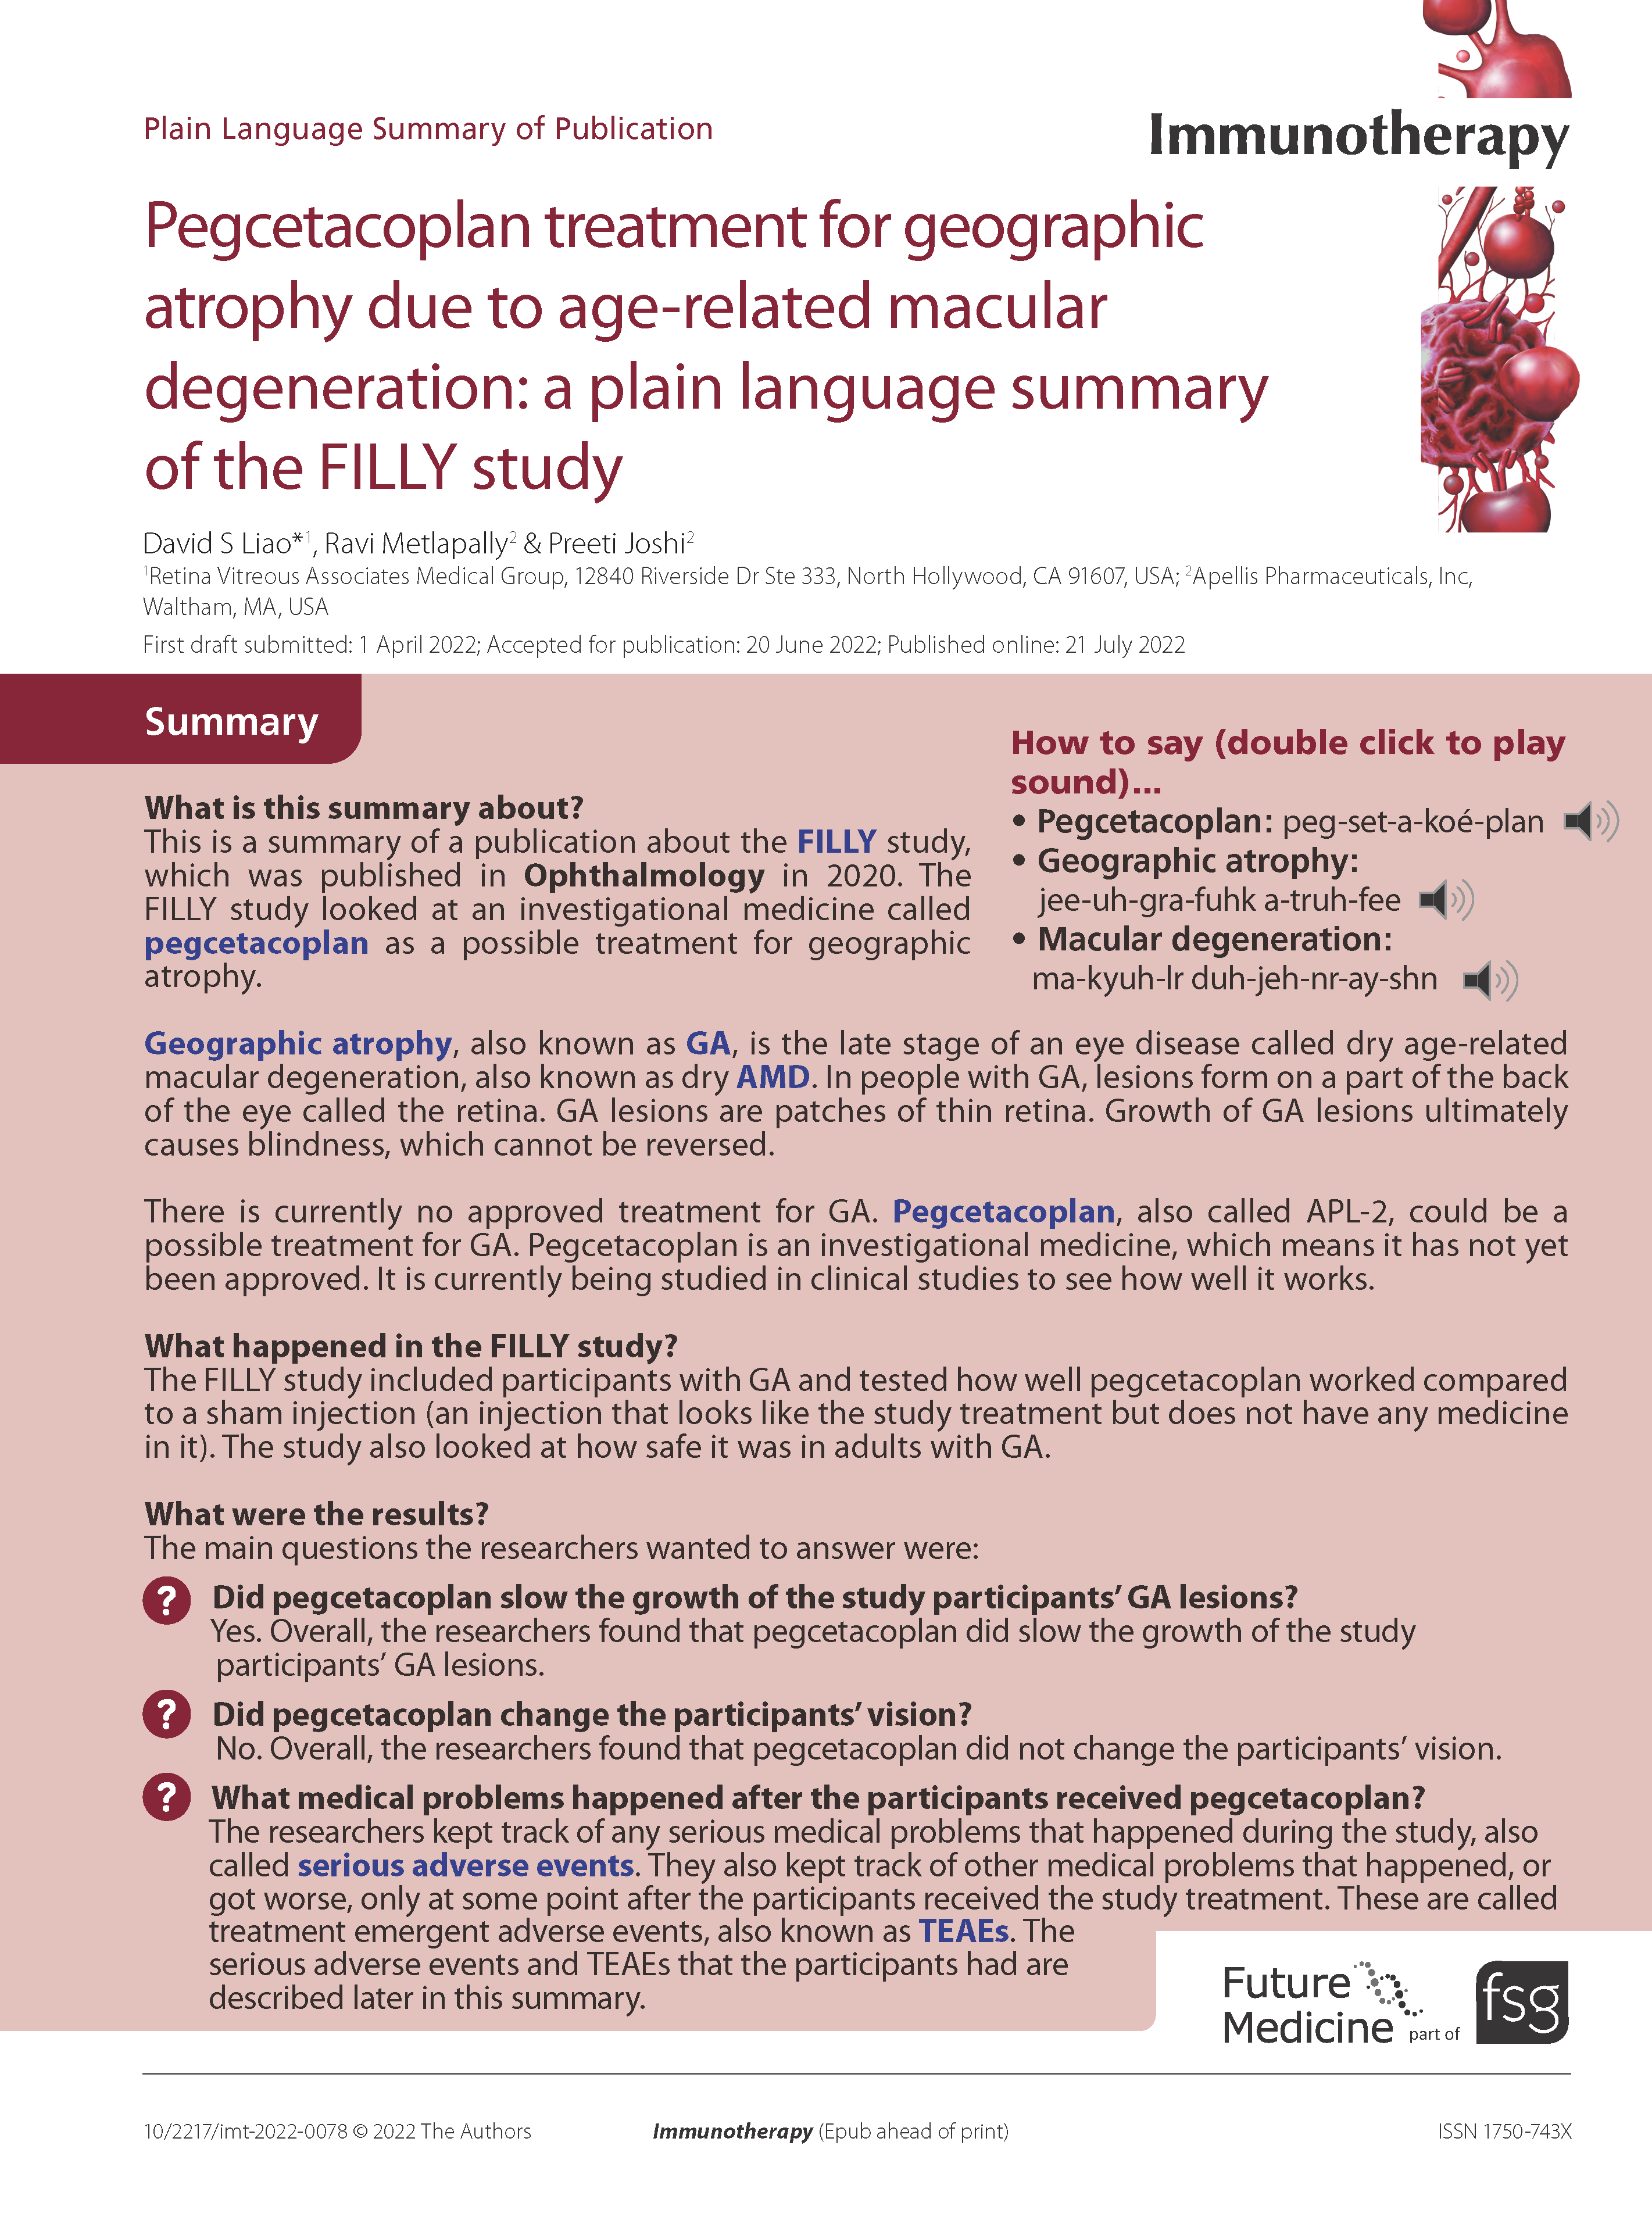 Pegcetacoplan treatment for geographic atrophy due to age-related macular degeneration: a plain language summary of the FILLY study